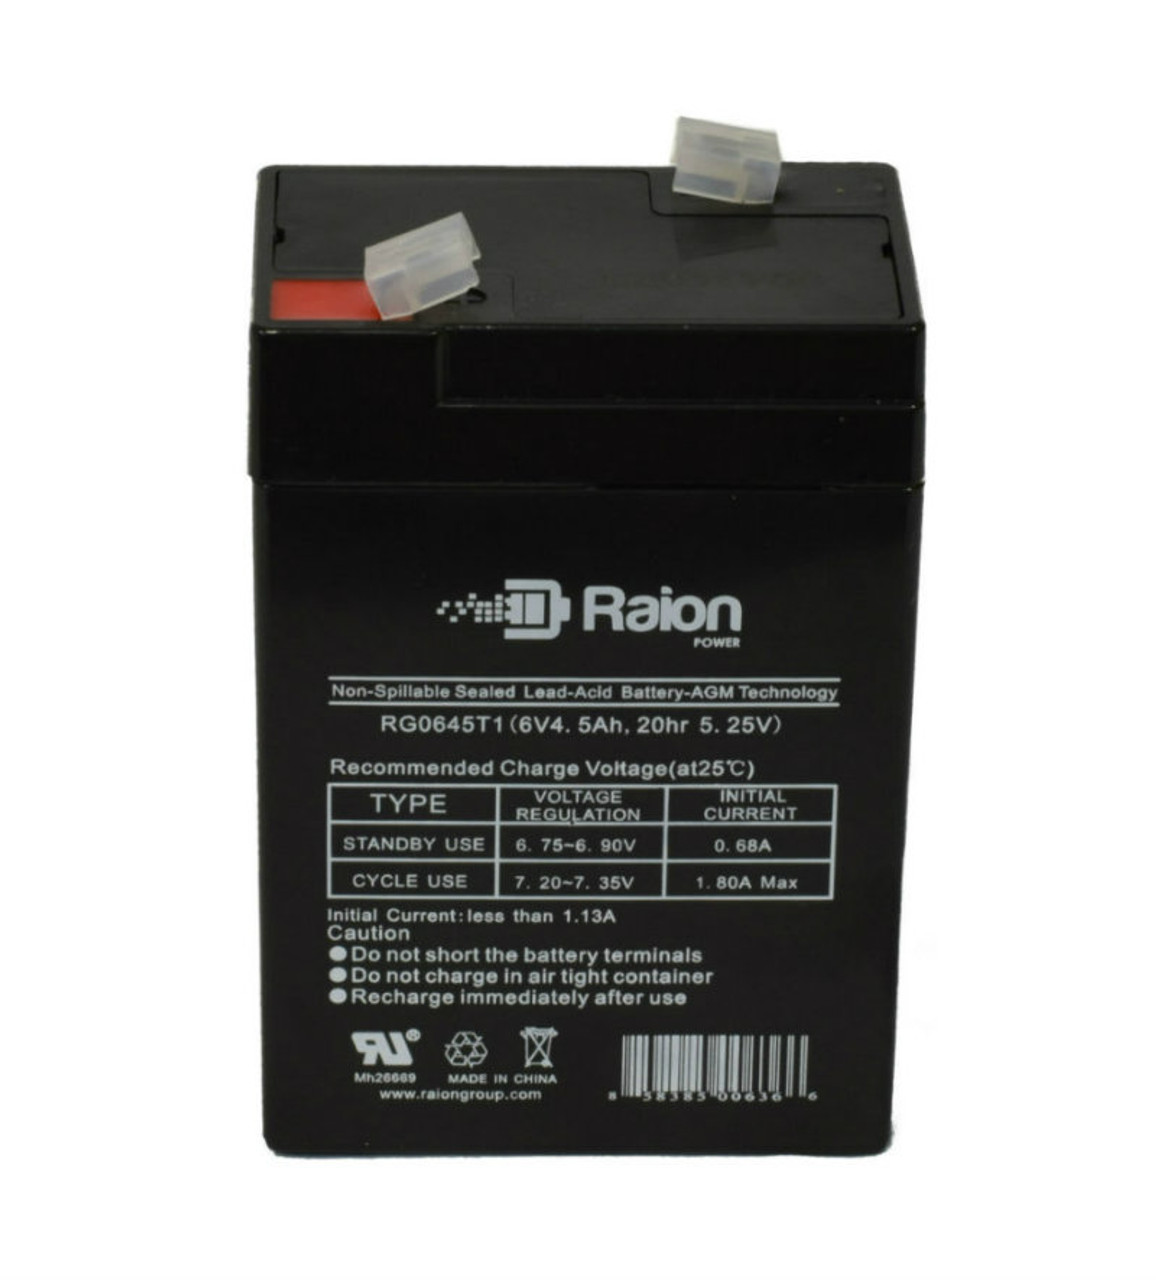 Raion Power RG0645T1 Replacement Battery Cartridge for Napel NP640